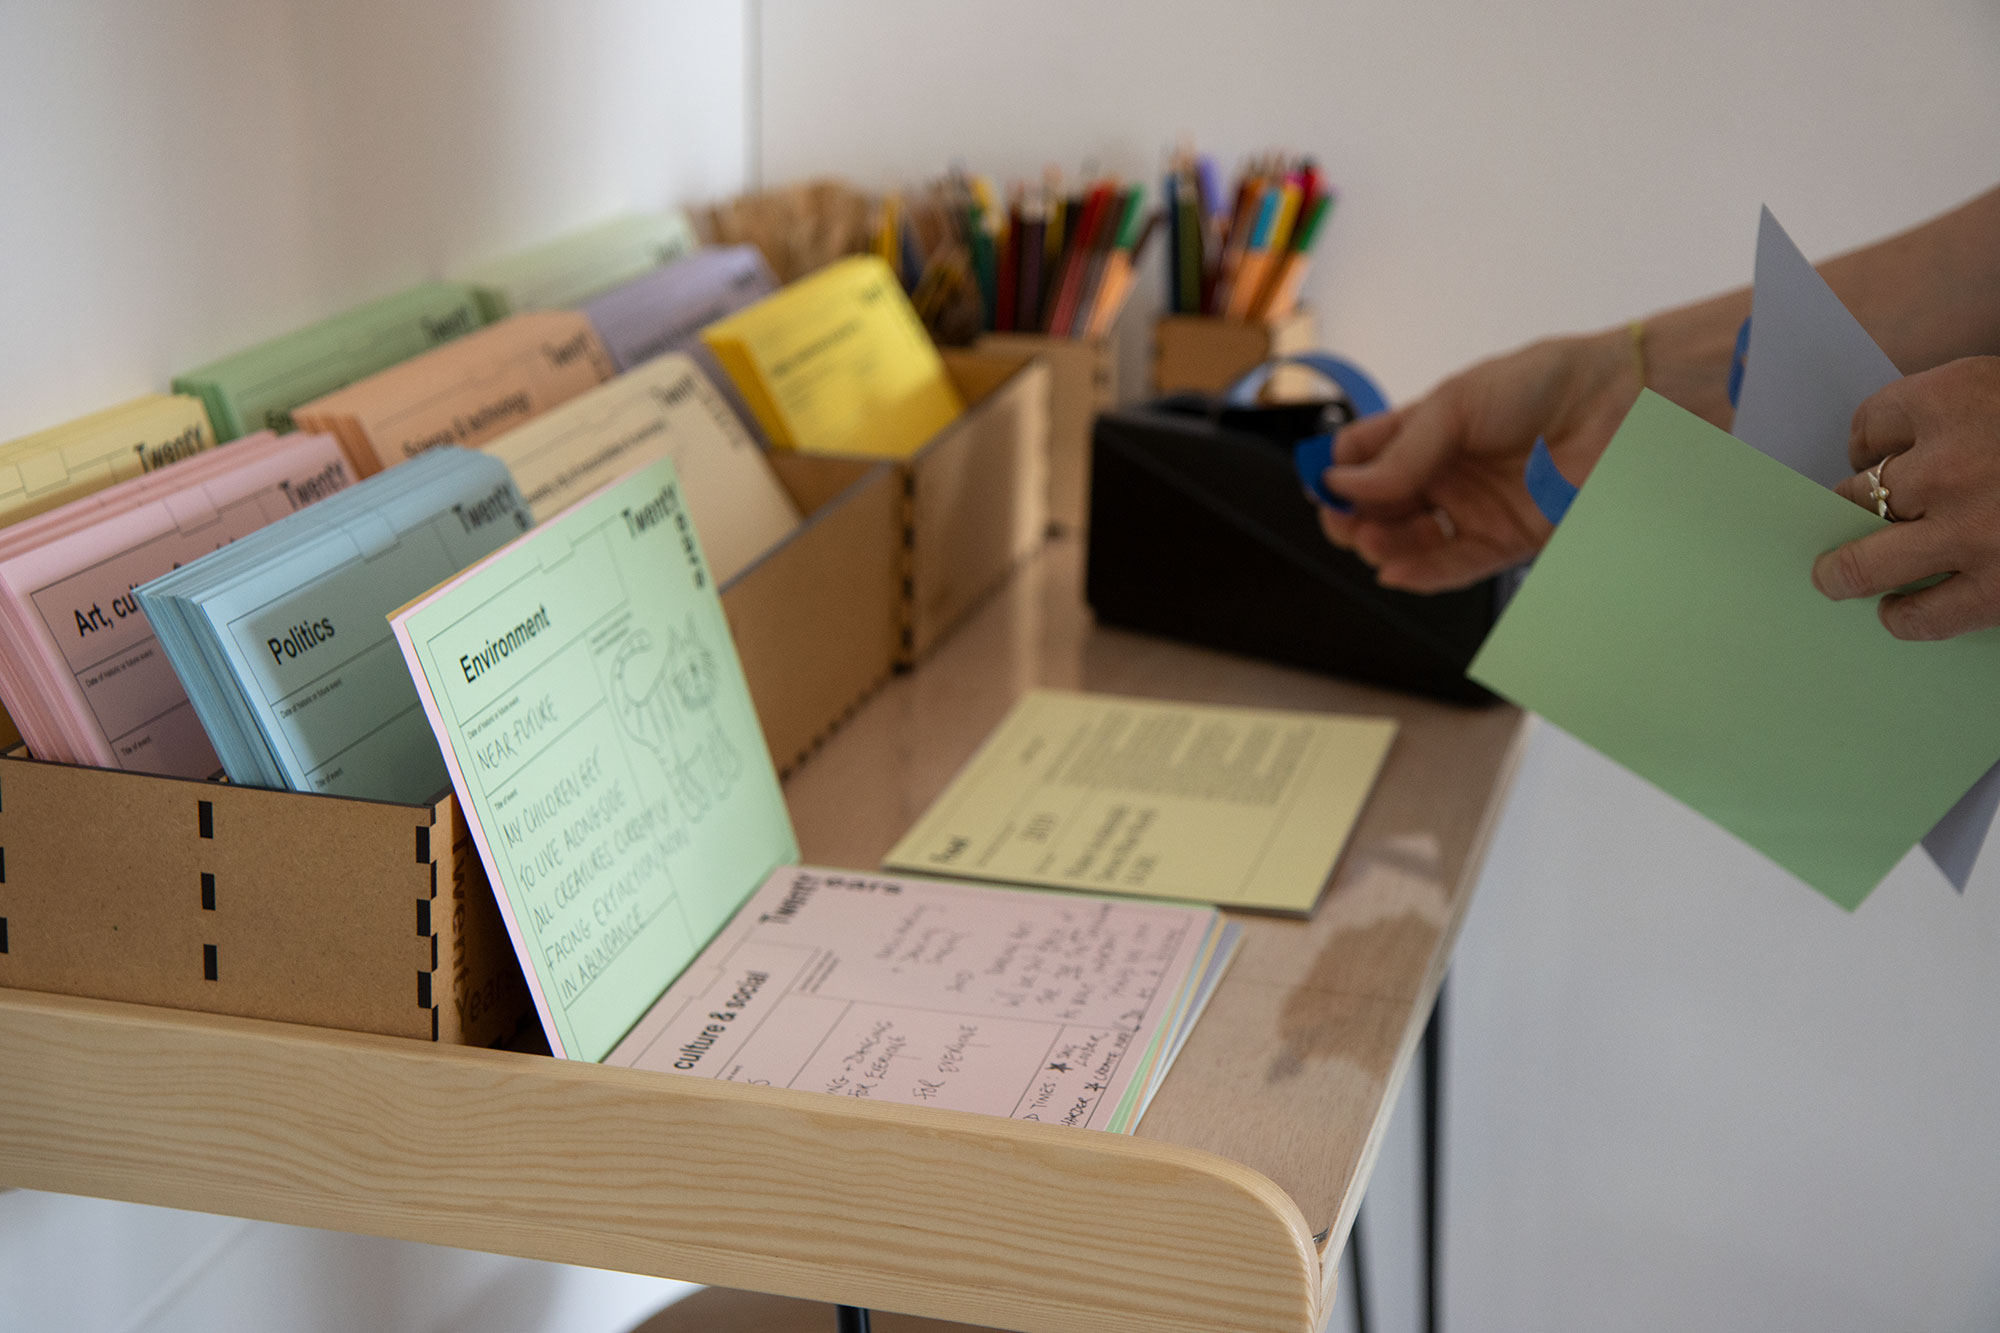 A table laid with coloured notecards, pens and pencils and a tape dispenser. A hand is pulling tape from the dispenser while another holds two of the notecards.